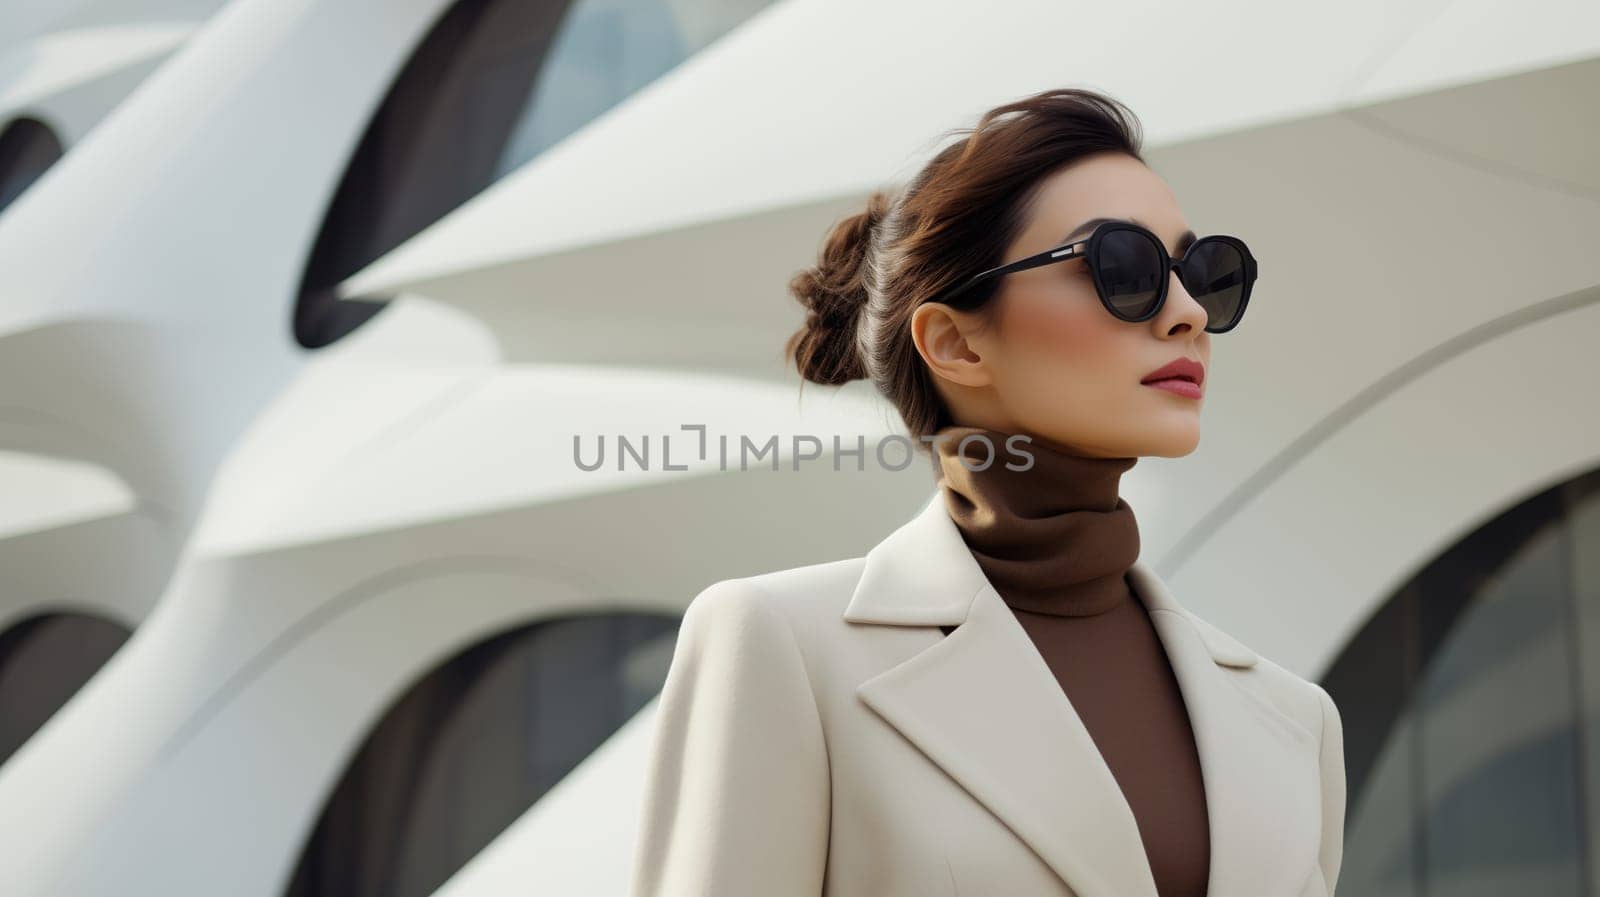 Fashionable portrait of stylish elegant woman, minimalism design architecture of a modern building by Rohappy